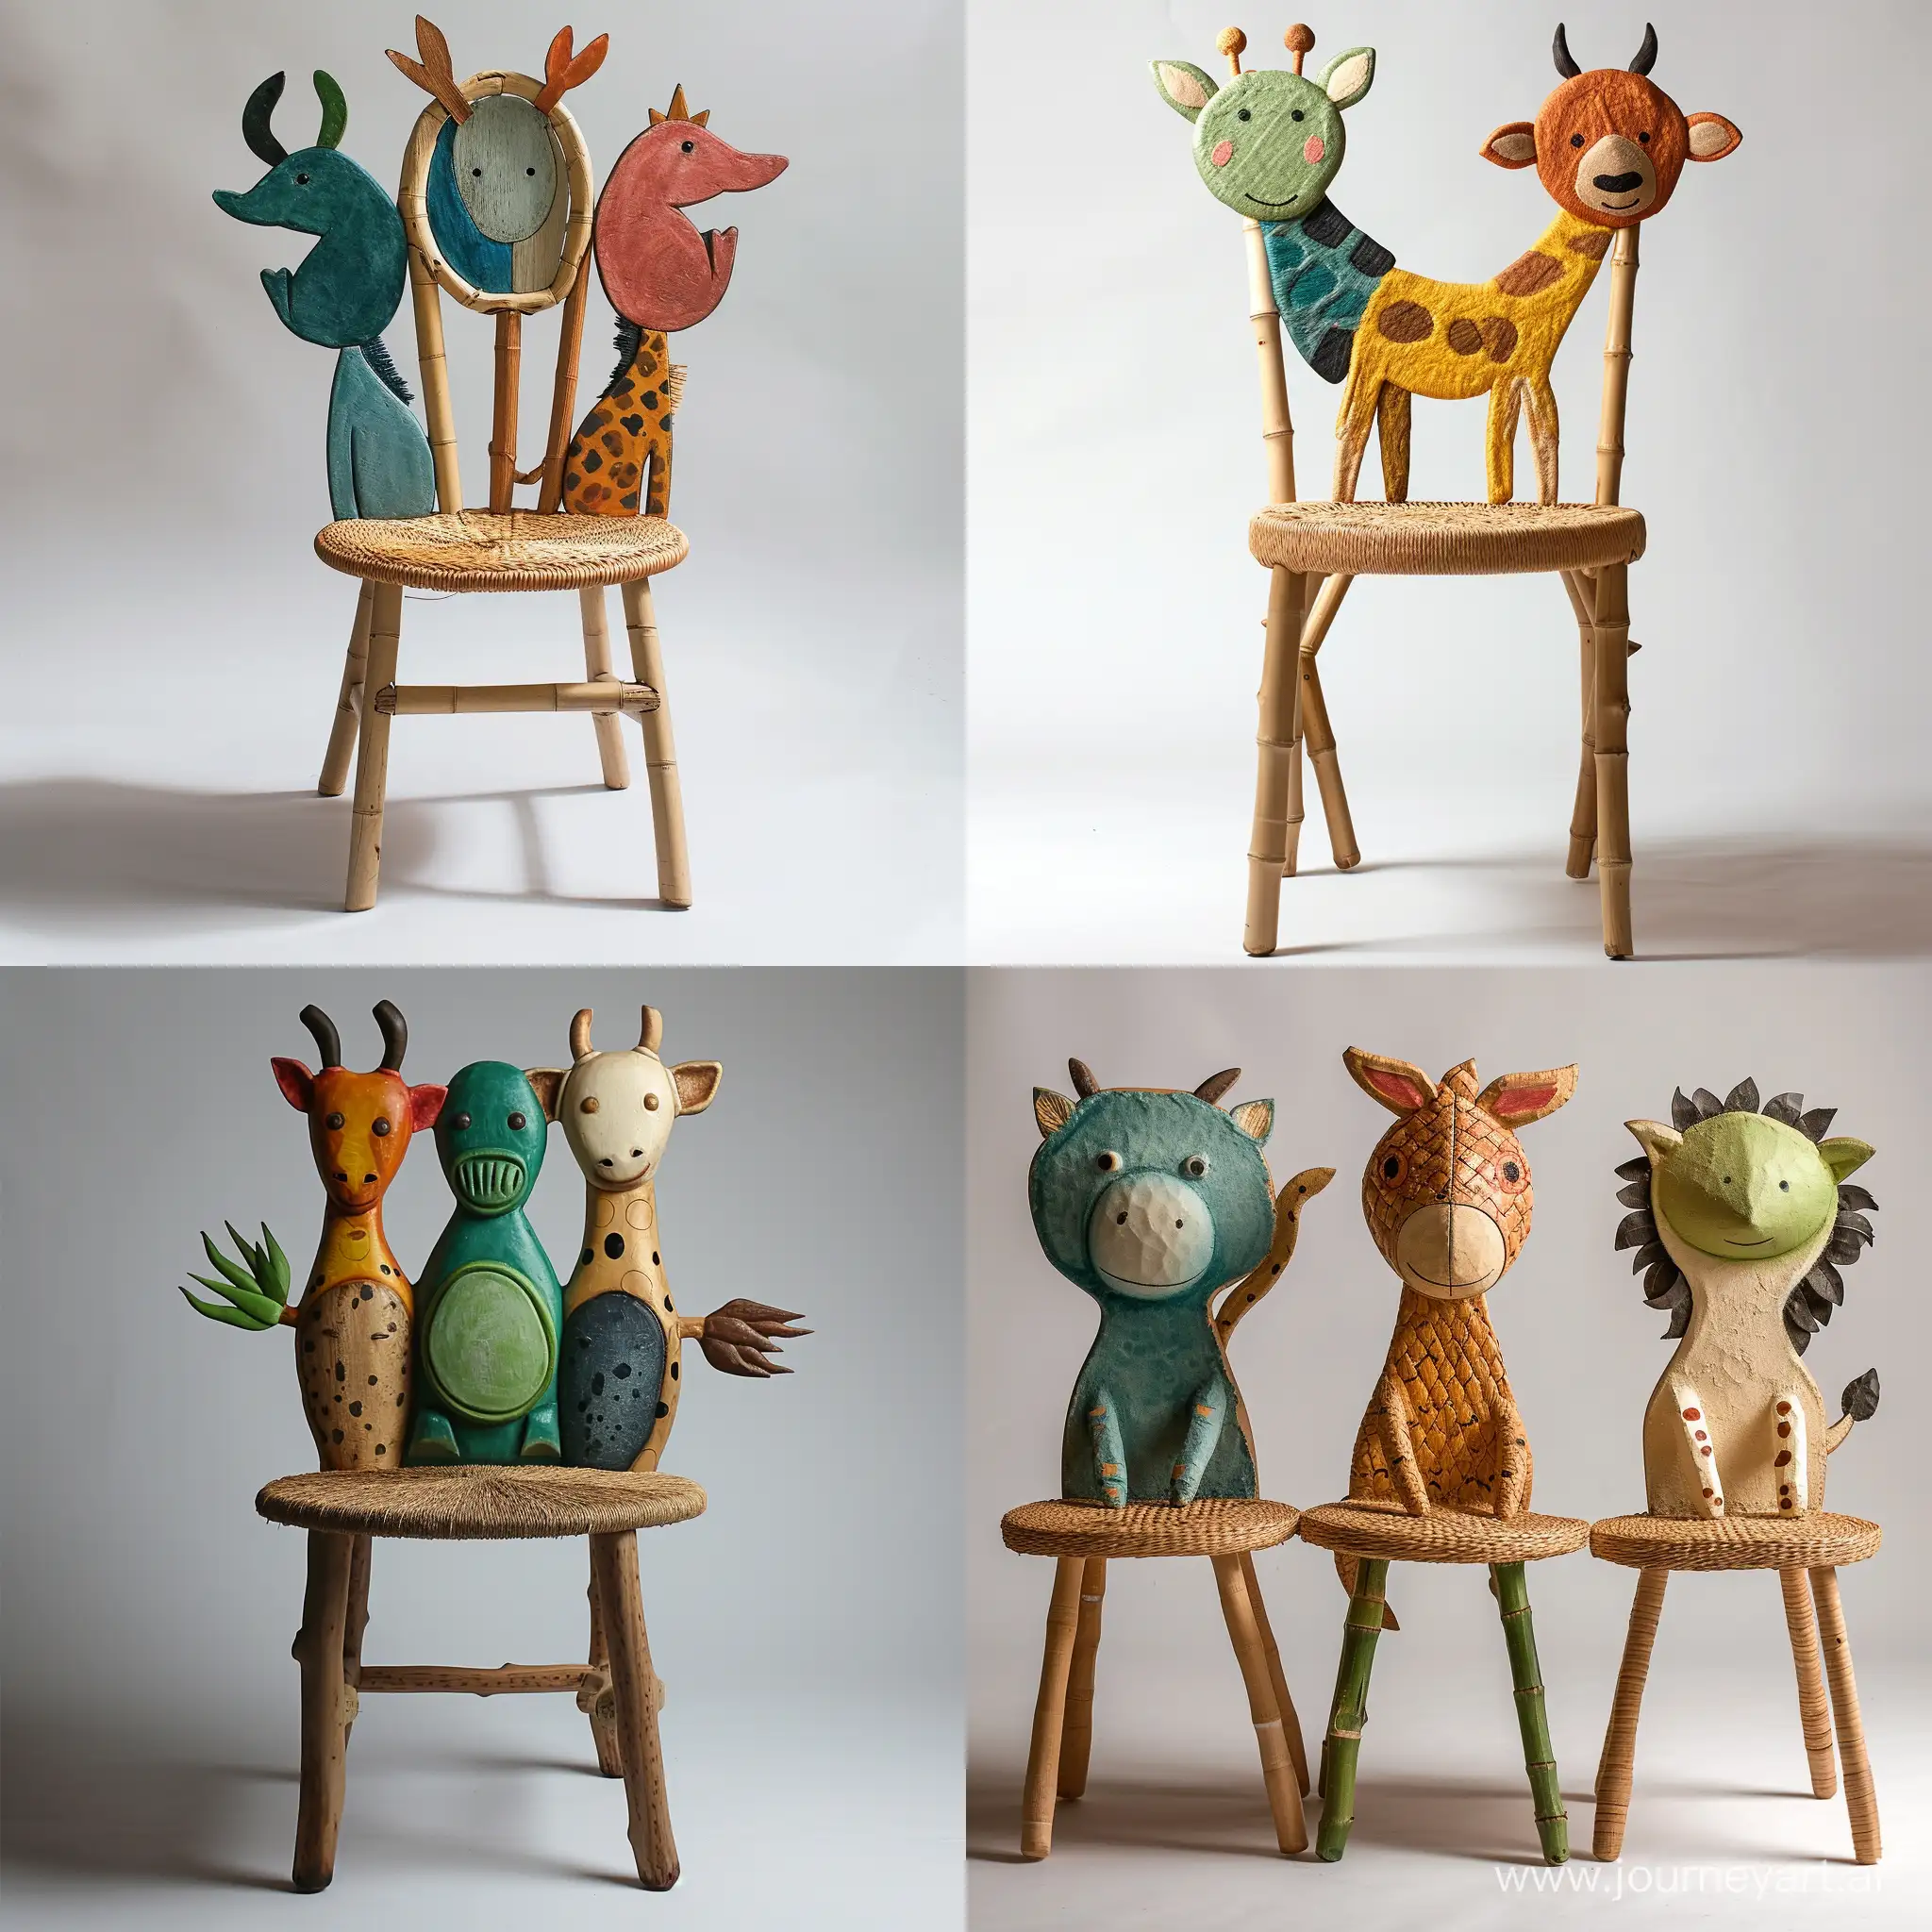 Imagine an image of a sturdy children’s chair Create an image of a sturdy children’s chair Thin and using minimal materials for construction for construction inspired by cute safari animals, with backrests shaped like different creatures. Use recycled wood for the frame and woven plant fibers for seating areas, depicted in colors representative of the chosen animals. The seat should stand approximately 30cm tall, built to educate about wildlife and ensure durability.realistic  style for construction inspired by cute safari animals, with backrests shaped like different creatures. Use recycled wood for the frame and woven plant fibers for seating areas, depicted in colors representative of the chosen animals. The seat should stand approximately 30cm tall, built to educate about wildlife and ensure durability.realistic  style